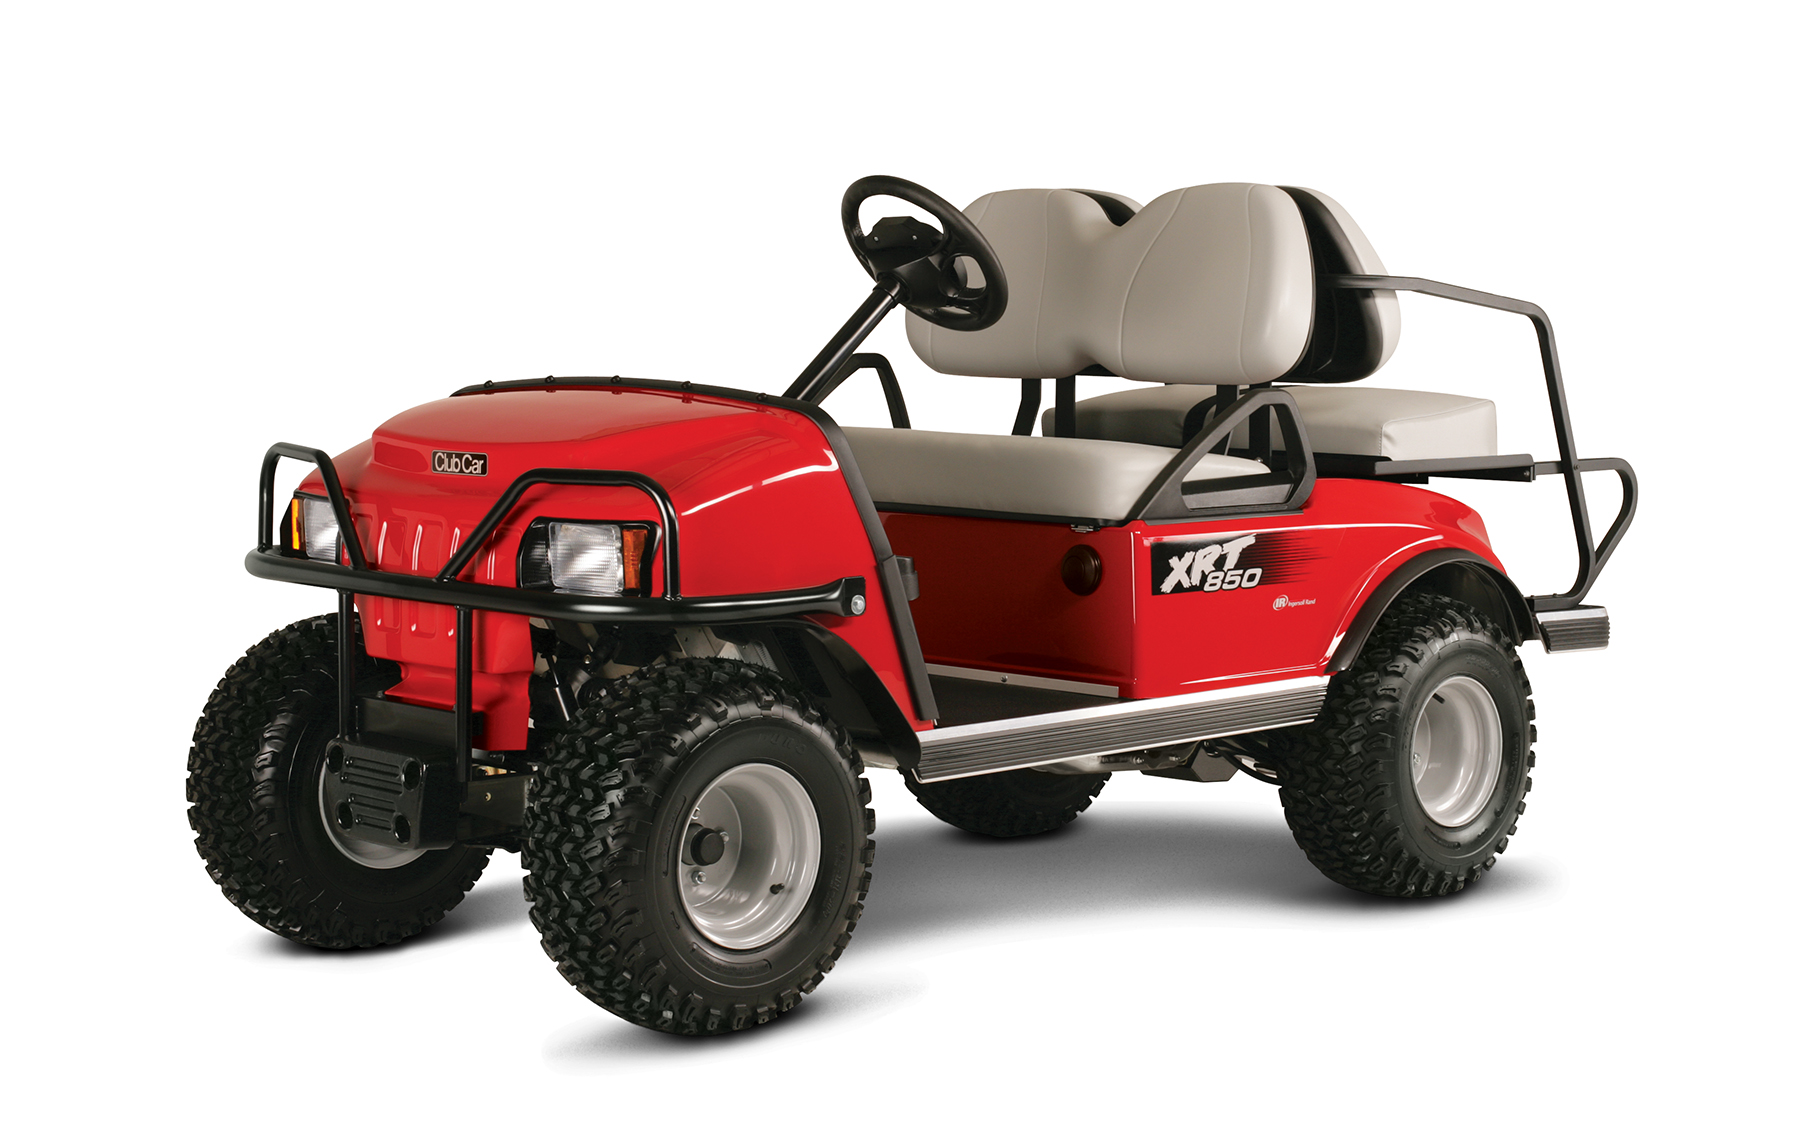 Club Car's  XRT800 utility vehicle has a 14-hp rated EFI engine and accommodates an optional limited slip differential that will take you into places that once required a 4x4.